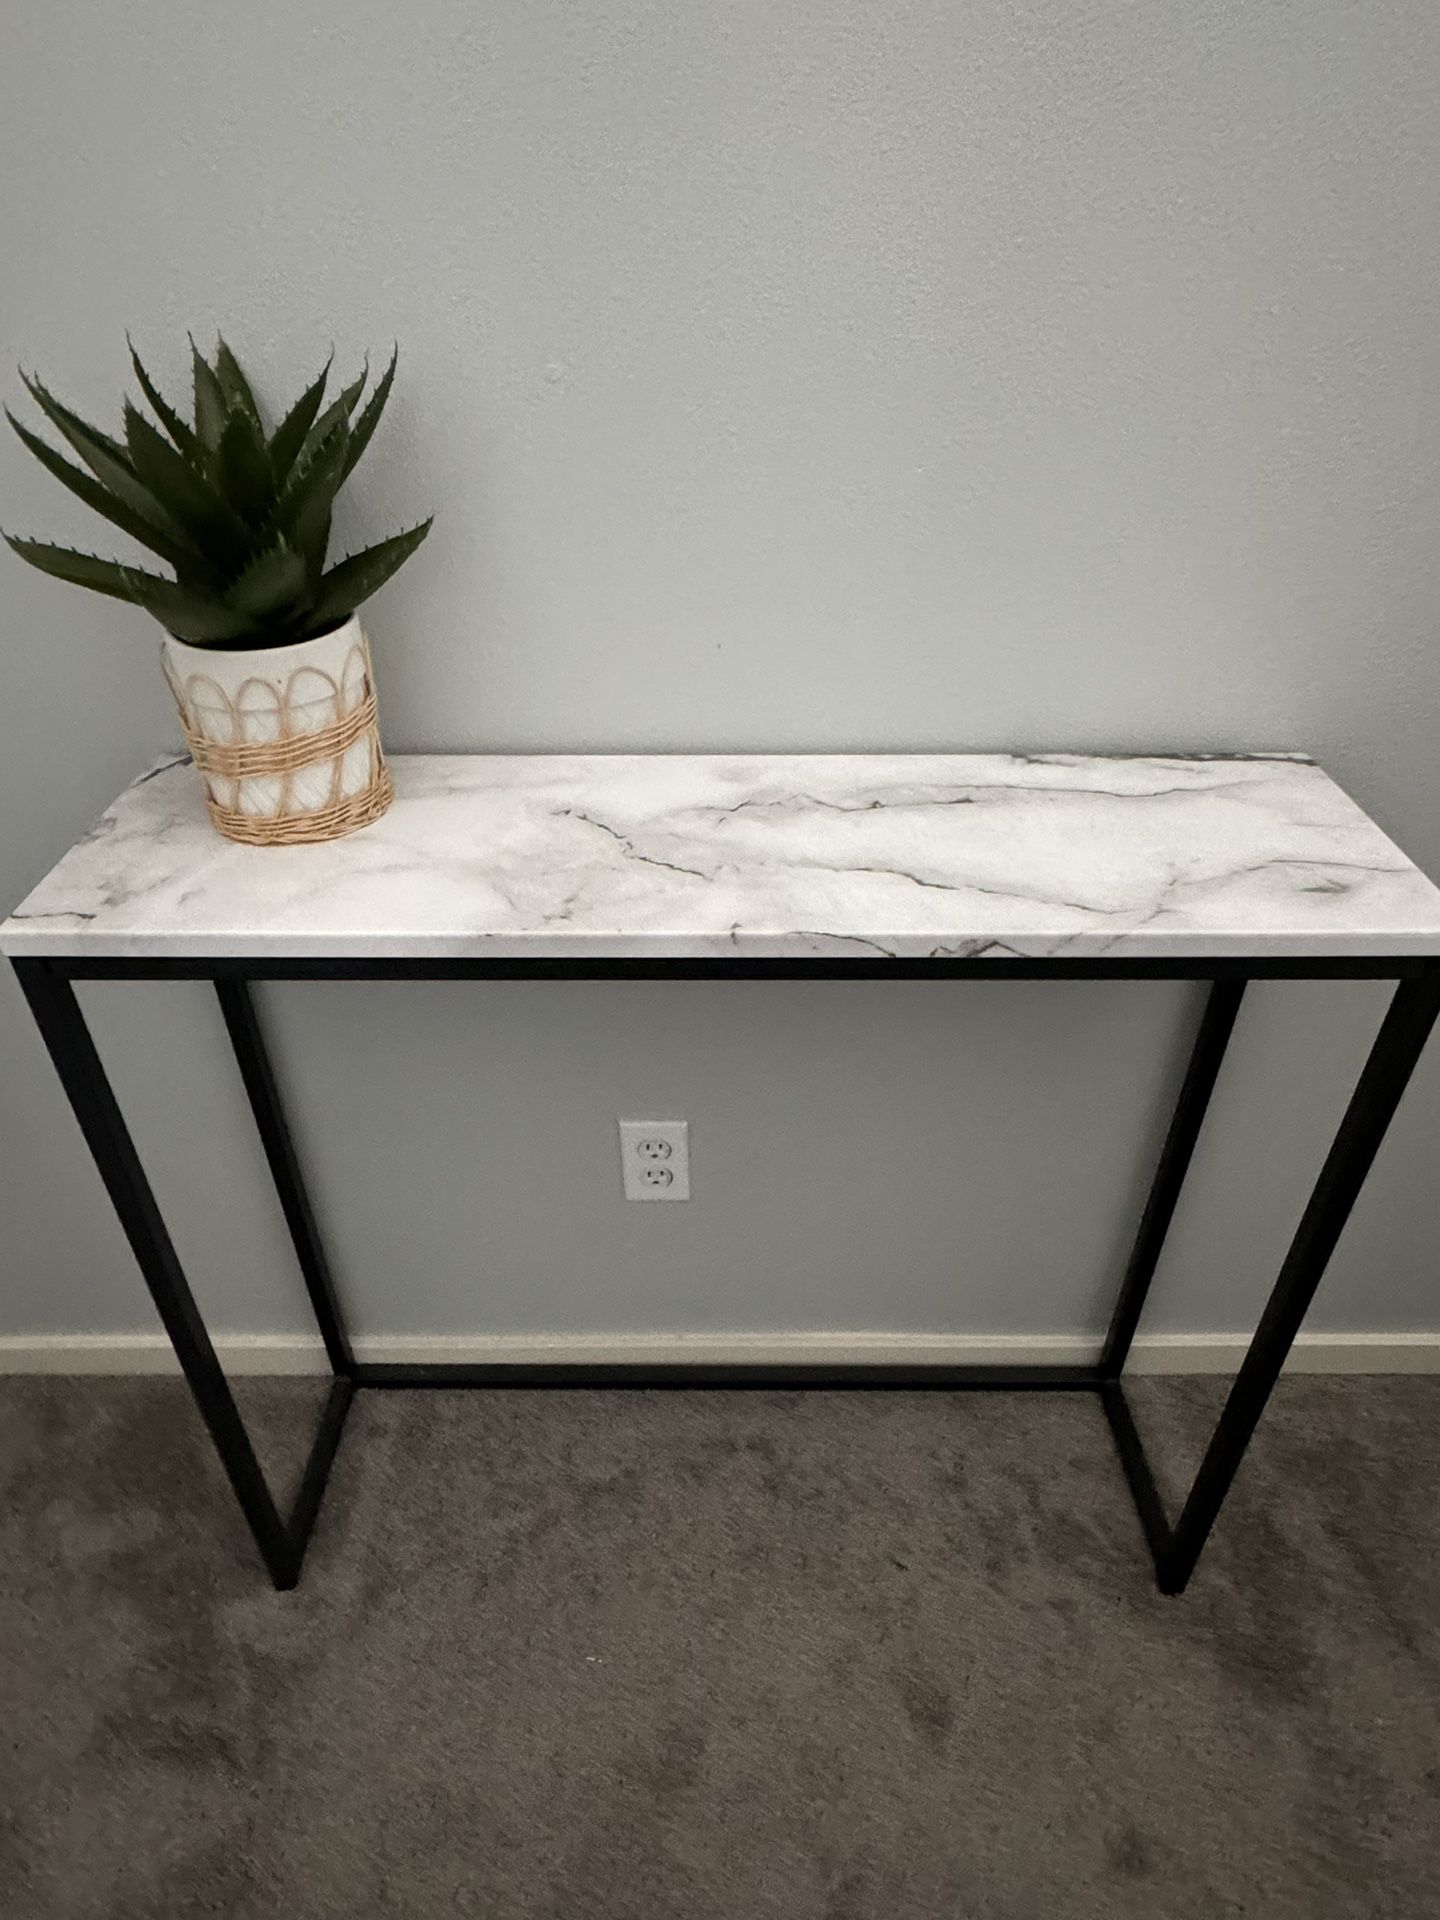 Faux Marble Side Table/Entryway Table/Sofa Table/Bar Table/Display Table/Hallway Table. Lightweight. 36”w x 10”d x 32”h. Feel Free To Msg Me! Firm.